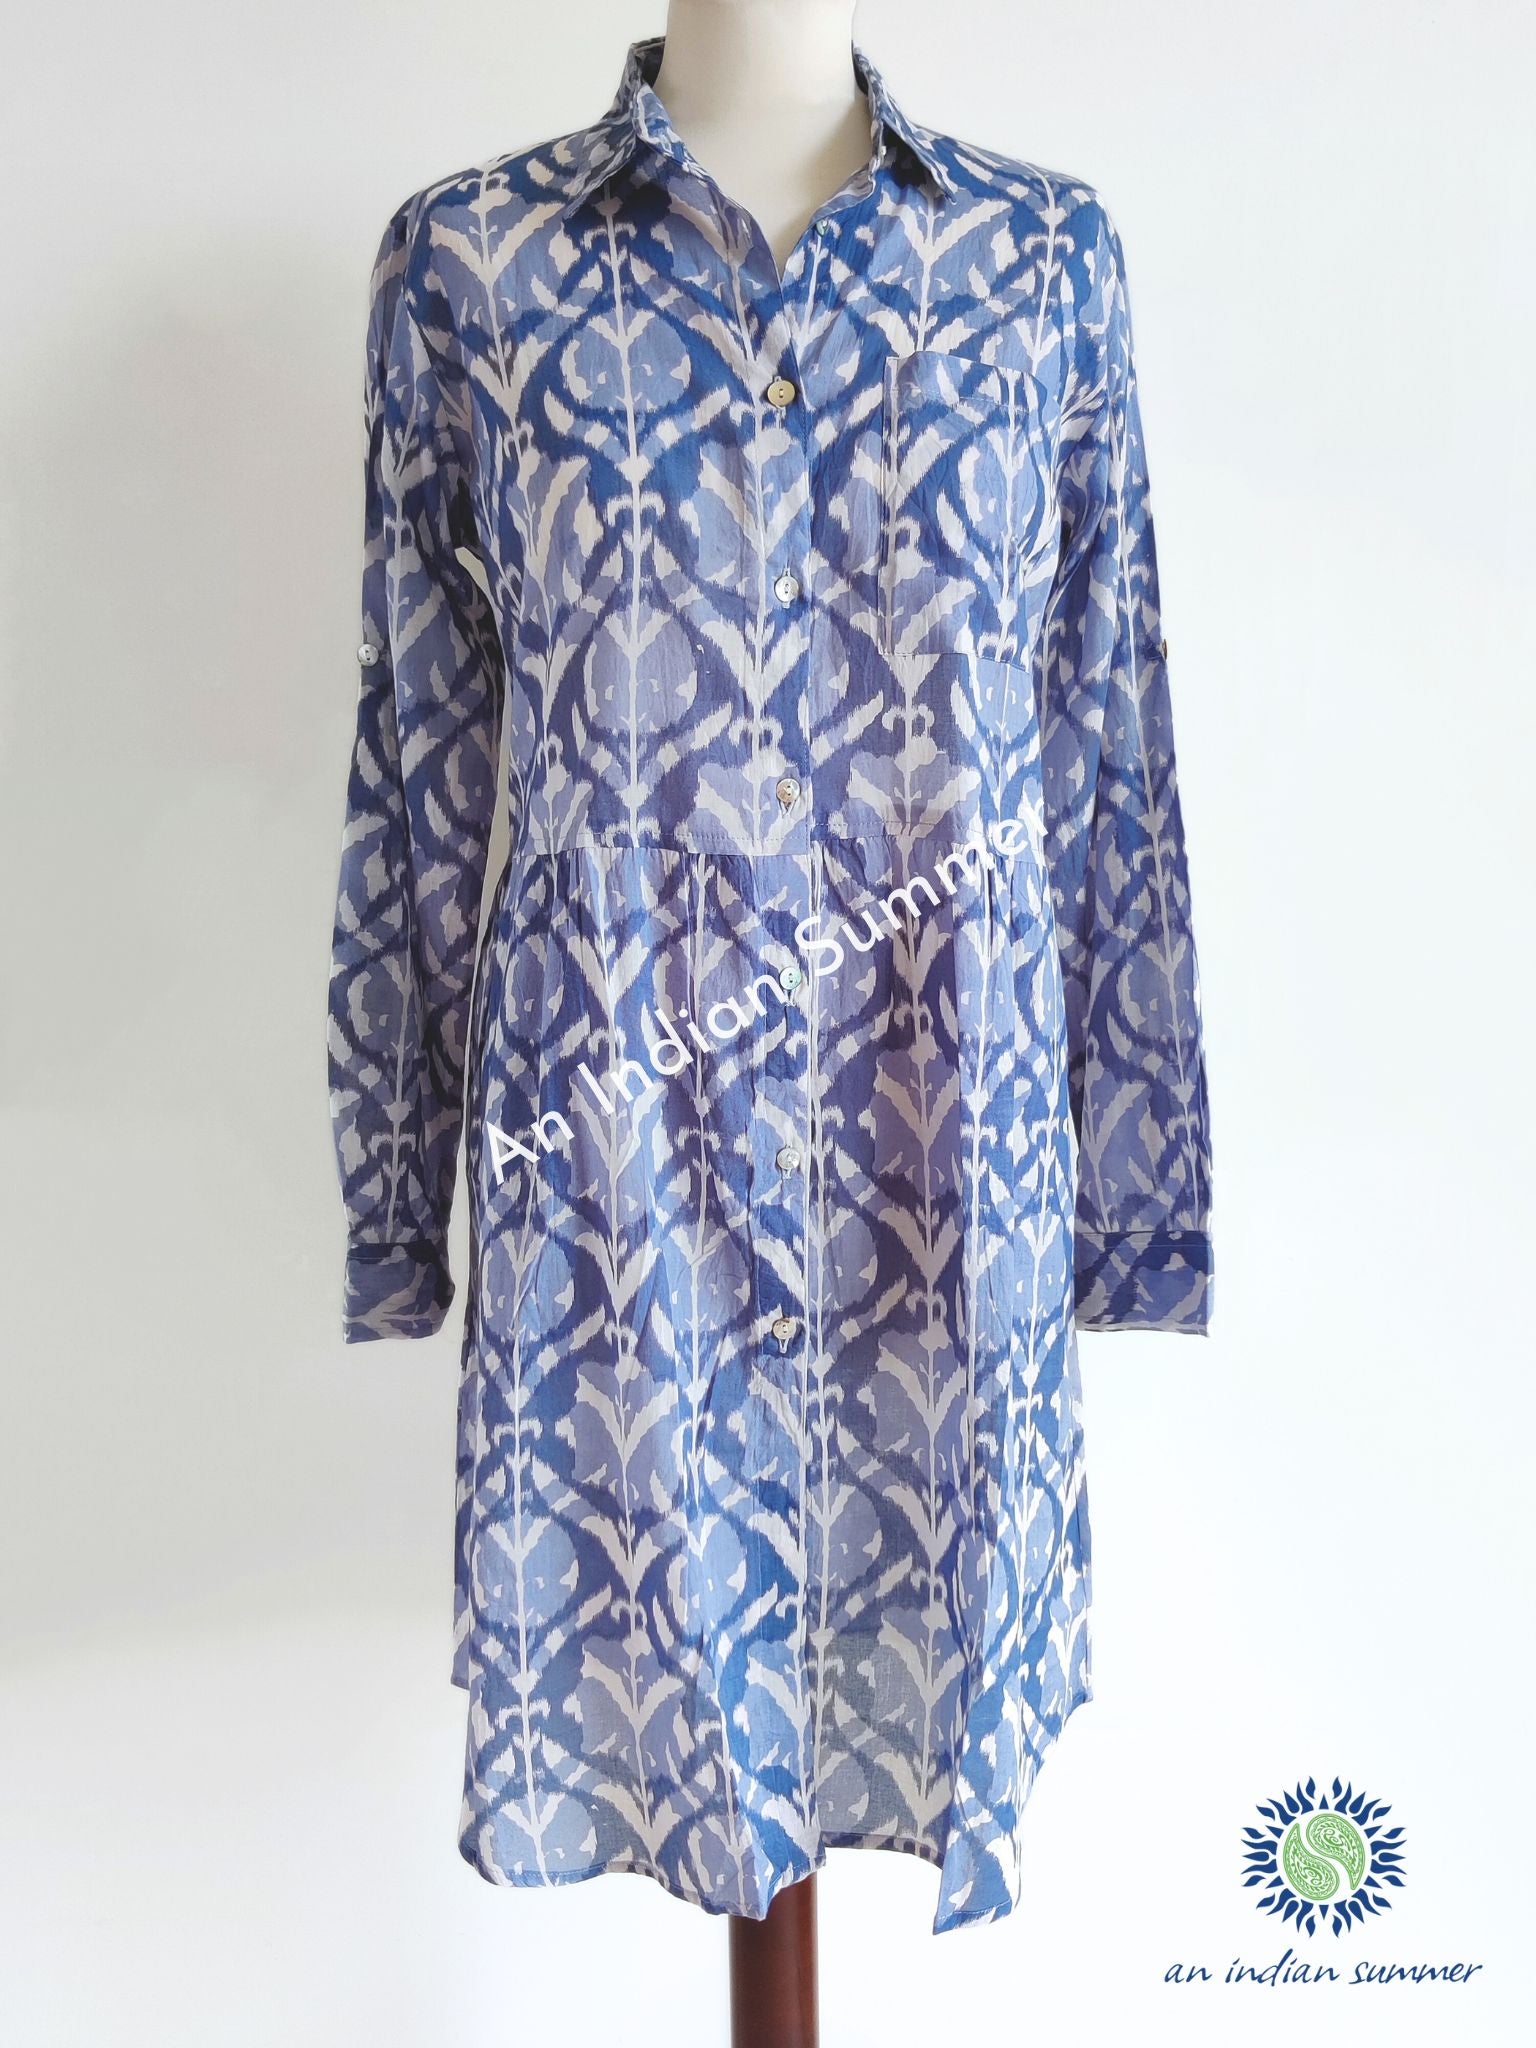 Lyra Shirt Dress Damask Blue | Cotton Voile | An Indian Summer | Seasonless Timeless Sustainable Ethical Authentic Artisan Conscious Clothing Lifestyle